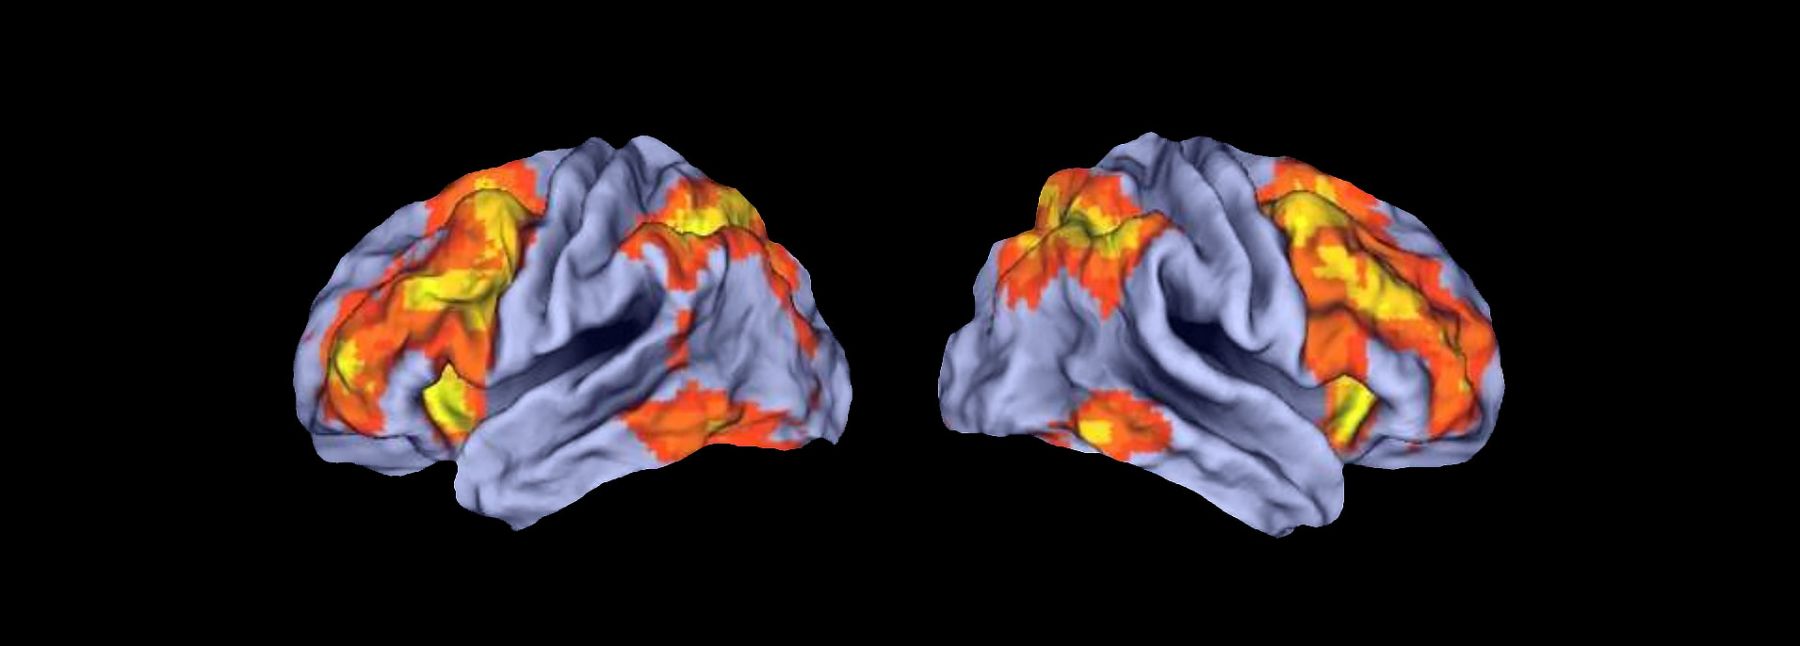 Functional MRI depicts working memory circuitry in the human brain.